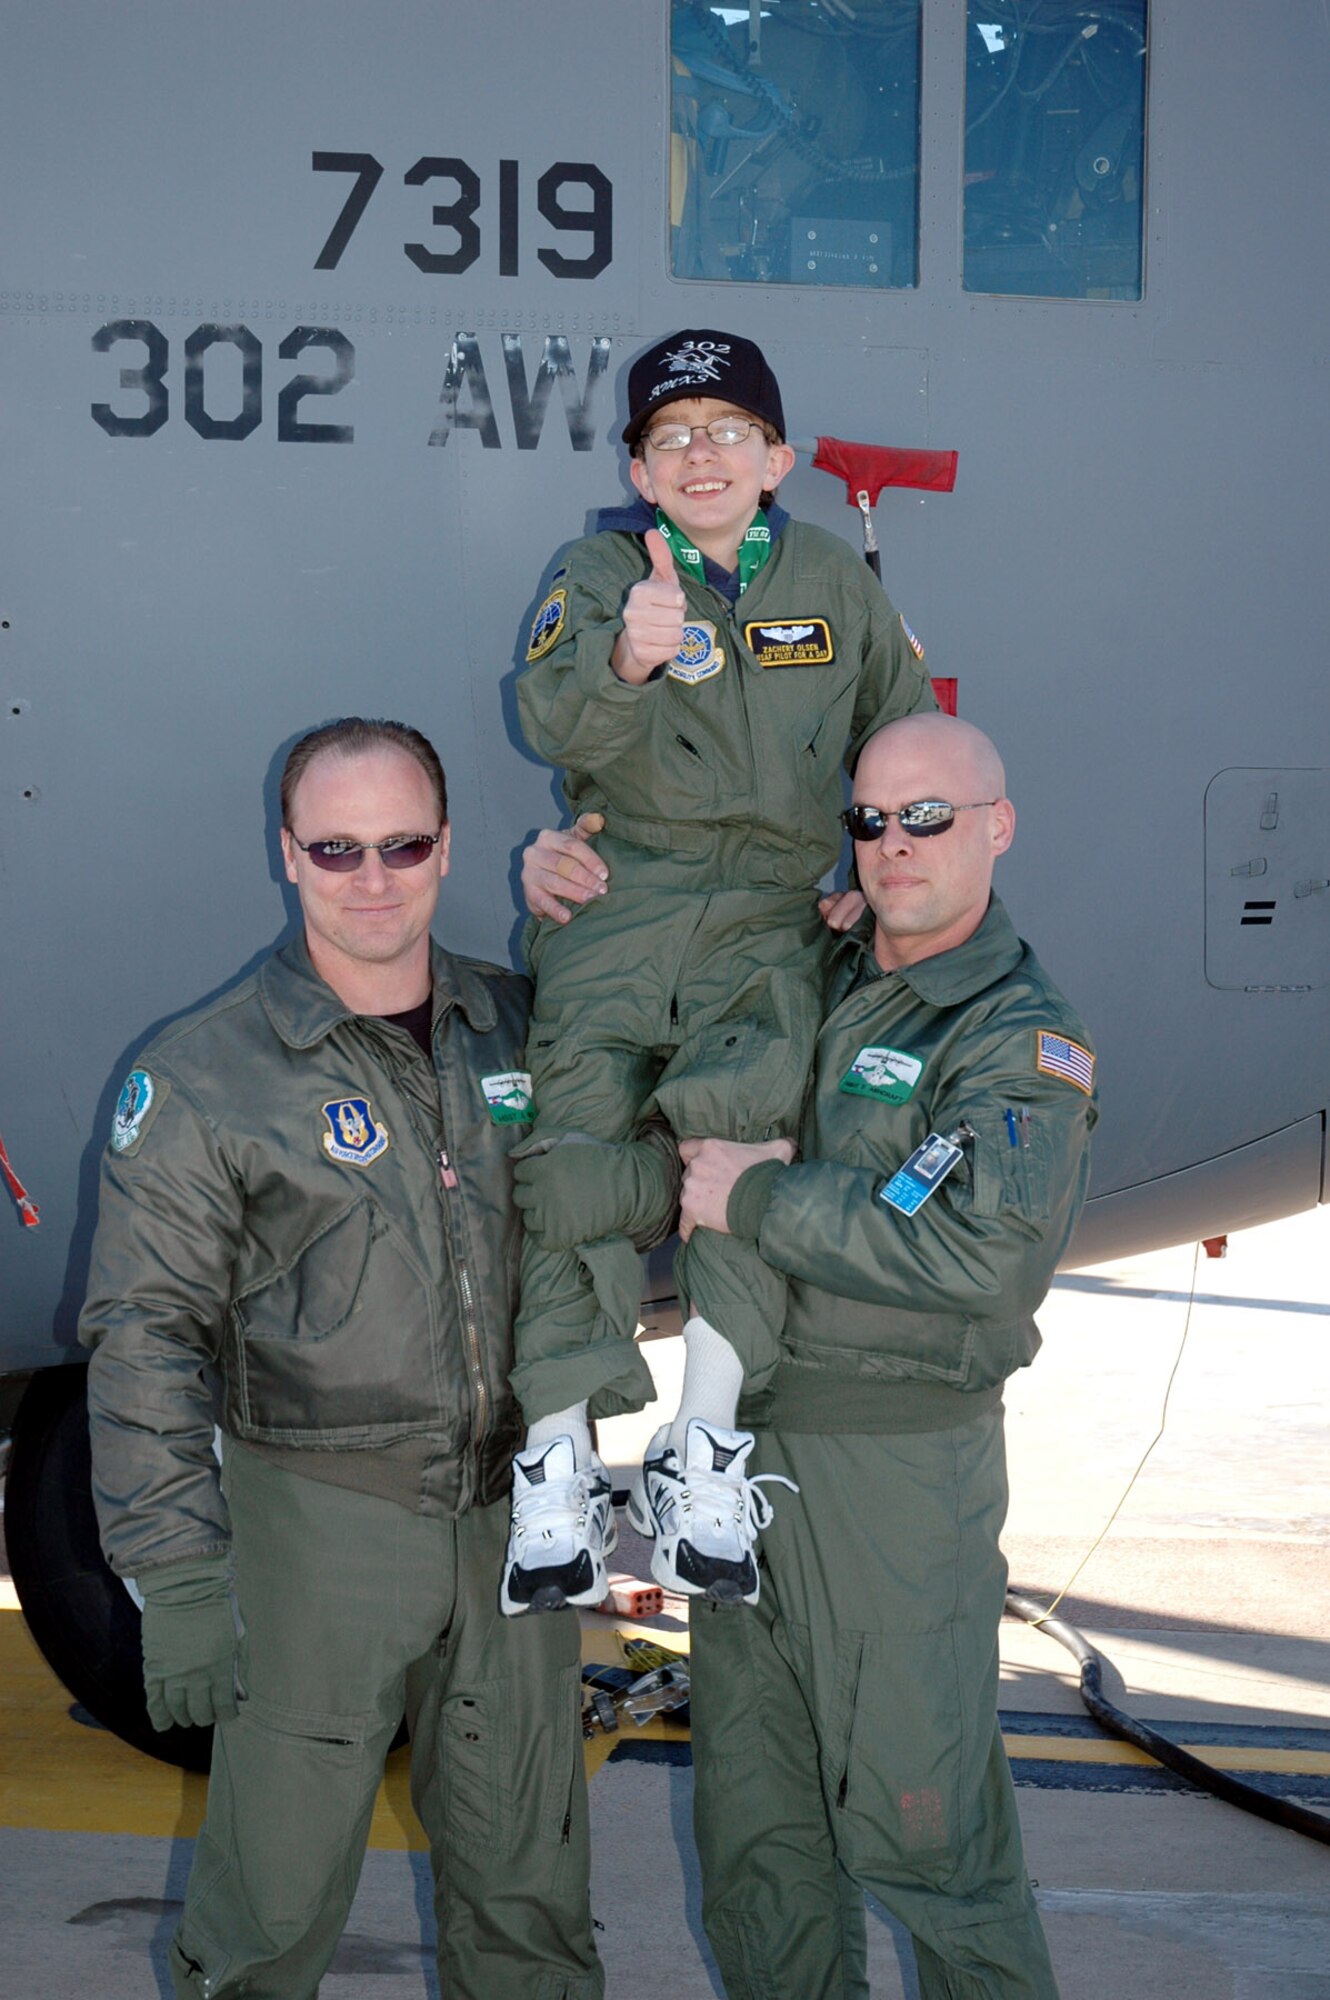 Master Sgt. Andre Nolte and Master Sgt. Derek Ashcroft hold Zachery Olsen on their shoulders after their tour of a C-130 Hercules Jan. 19 at Peterson Air Force Base, Colo. Zachery was made an honorary pilot through the 311th Airlift Squadron and the Make-A-Wish Foundation. Sergeant Nolte is a flight engineer, and Sergeant Ashcroft is a loadmaster, both with the 731st Airlift Squadron. (U.S. Air Force photo/Jennifer Ledford) 
